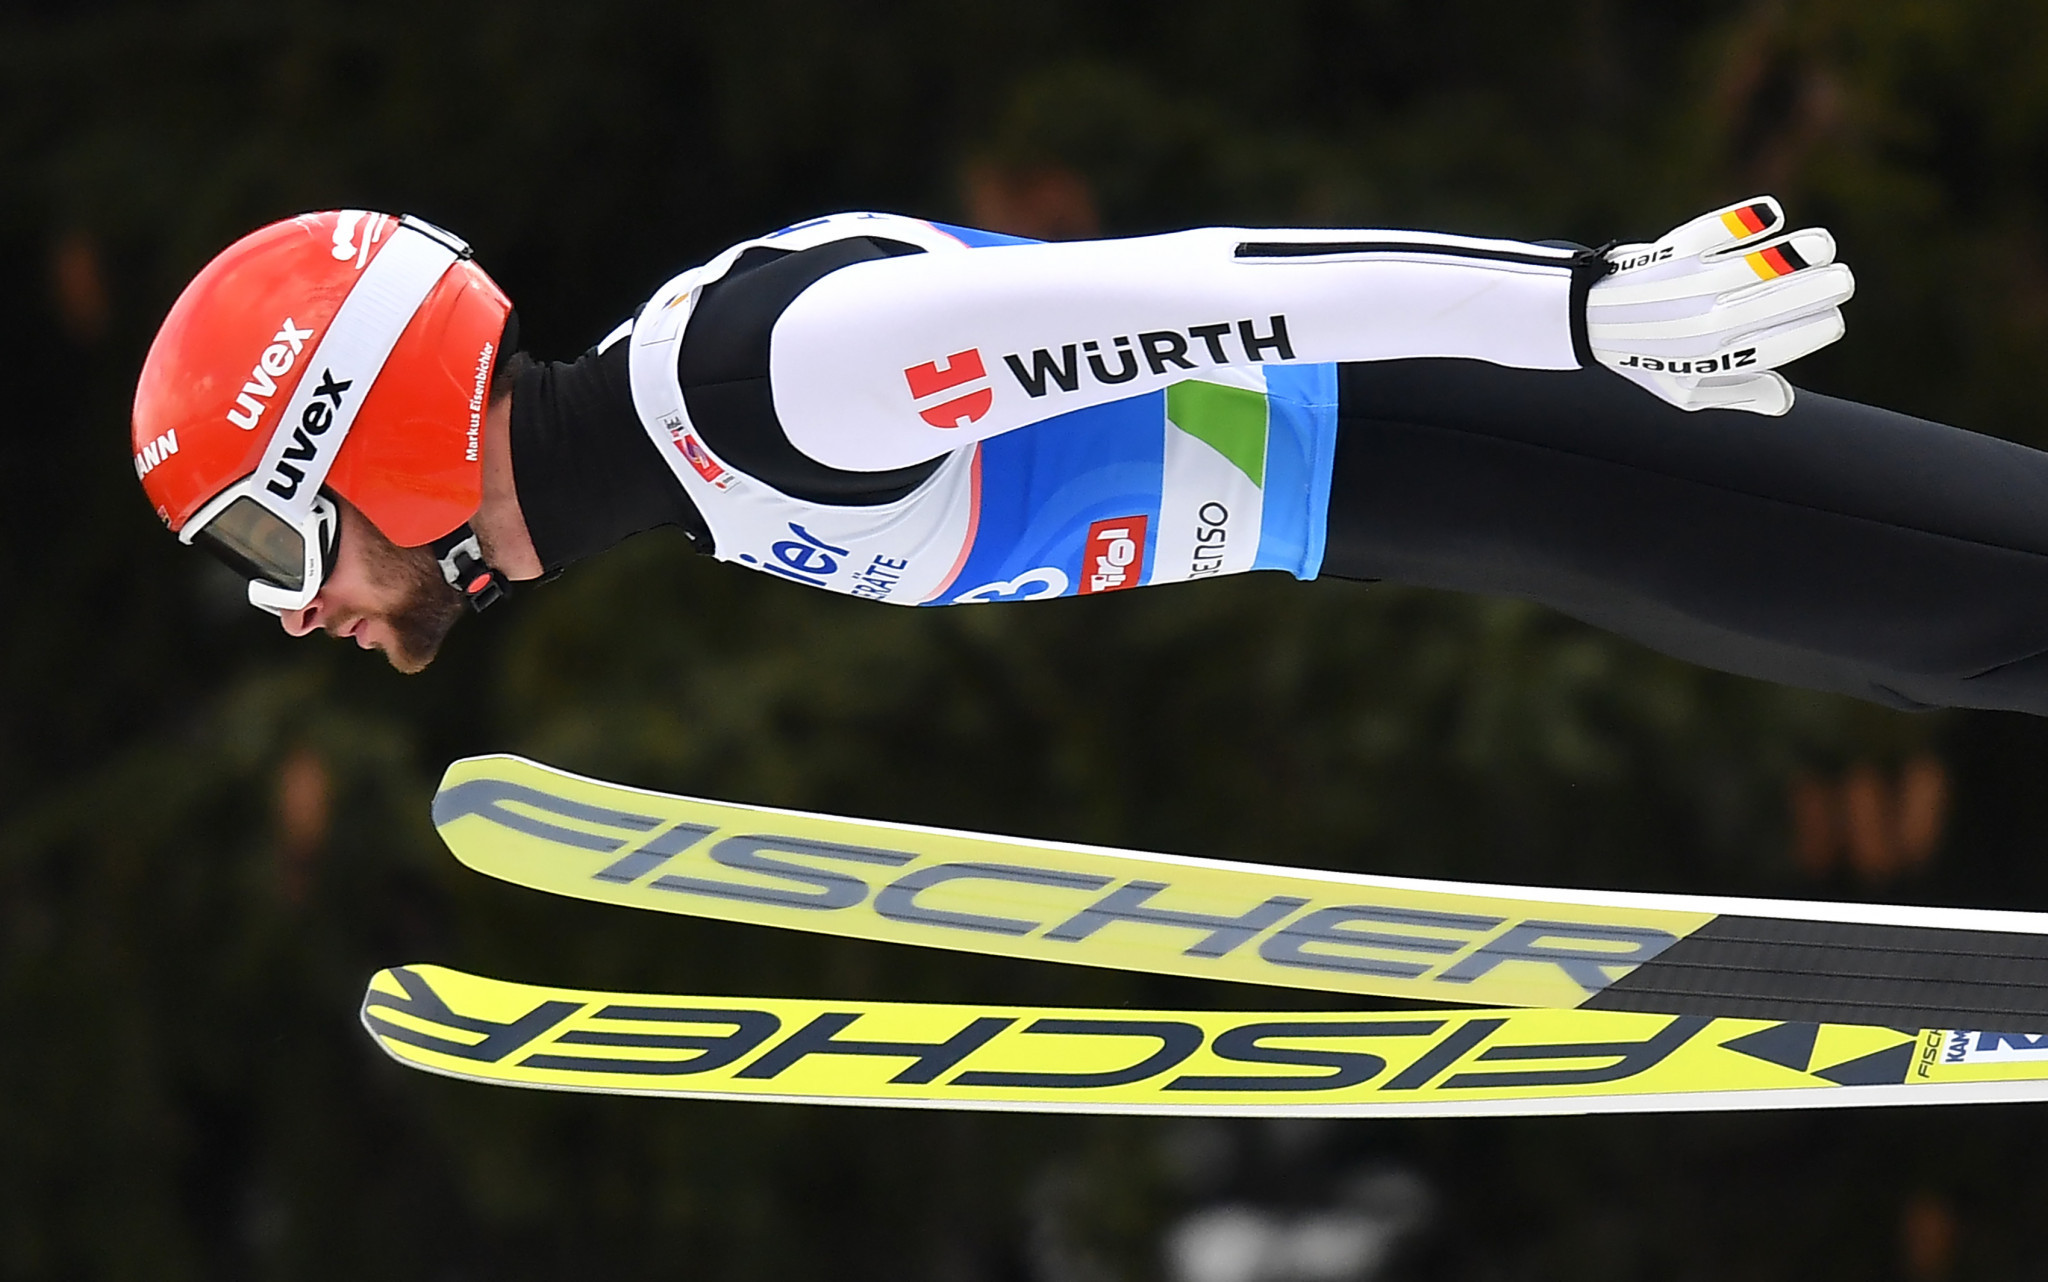 Markus Eisenbichler of Germany topped the ski jumping qualification event ©Getty Images